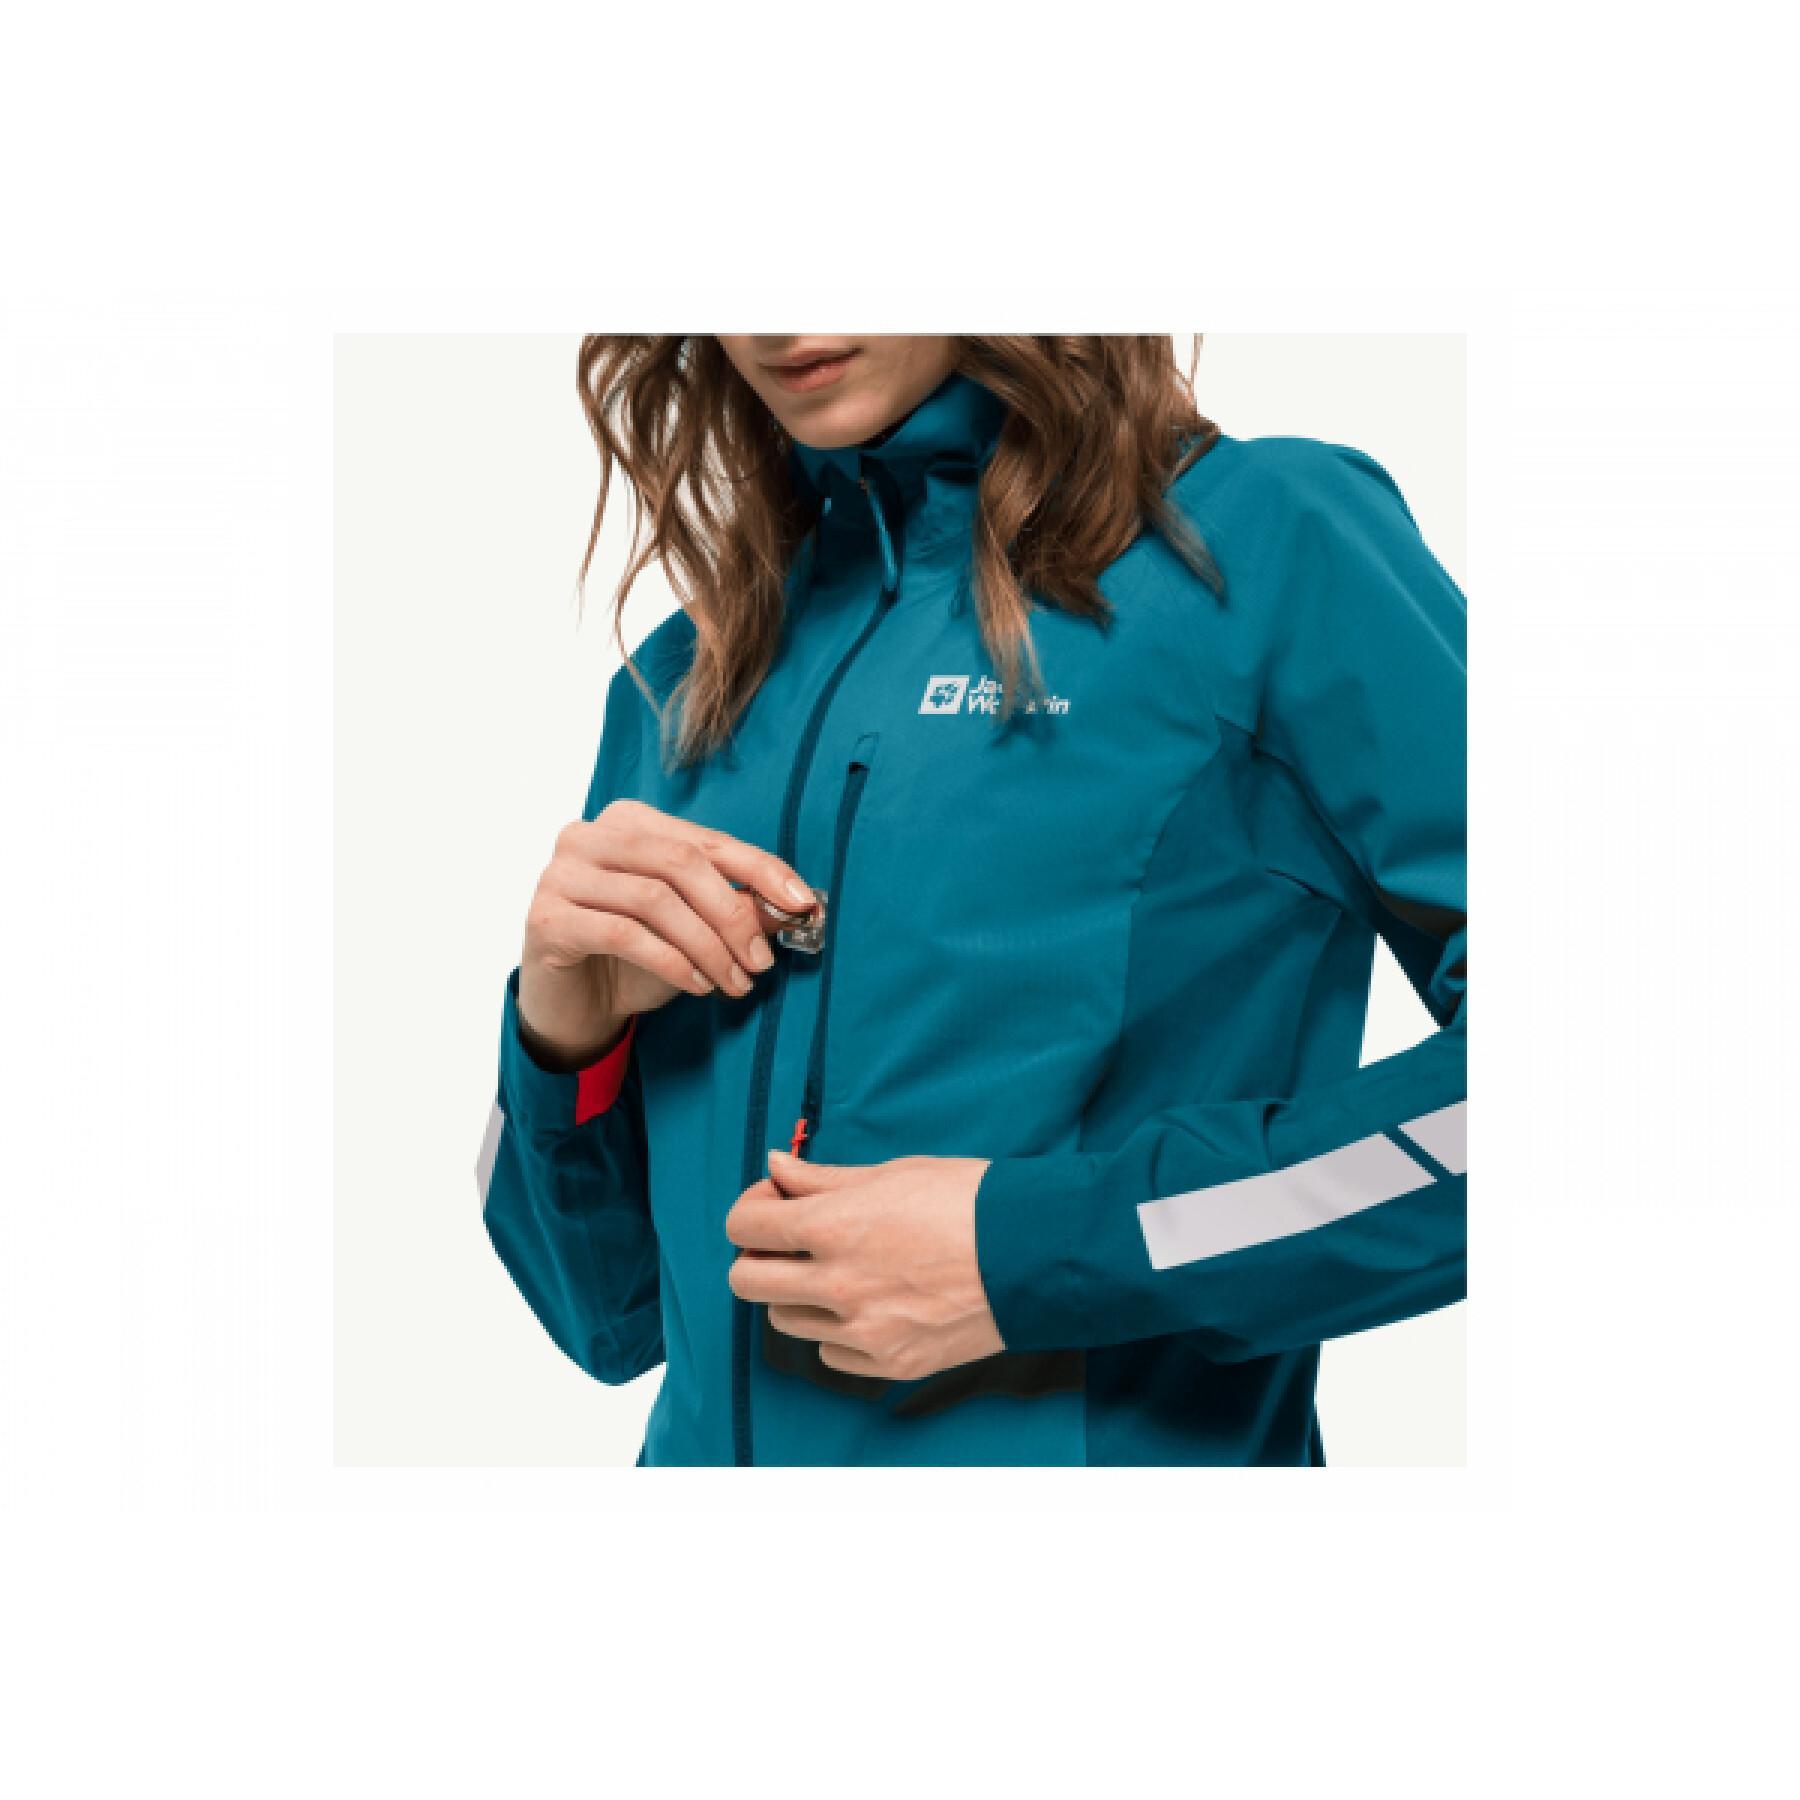 Chaqueta impermeable para mujer Jack Wolfskin Morobbia 2.5L